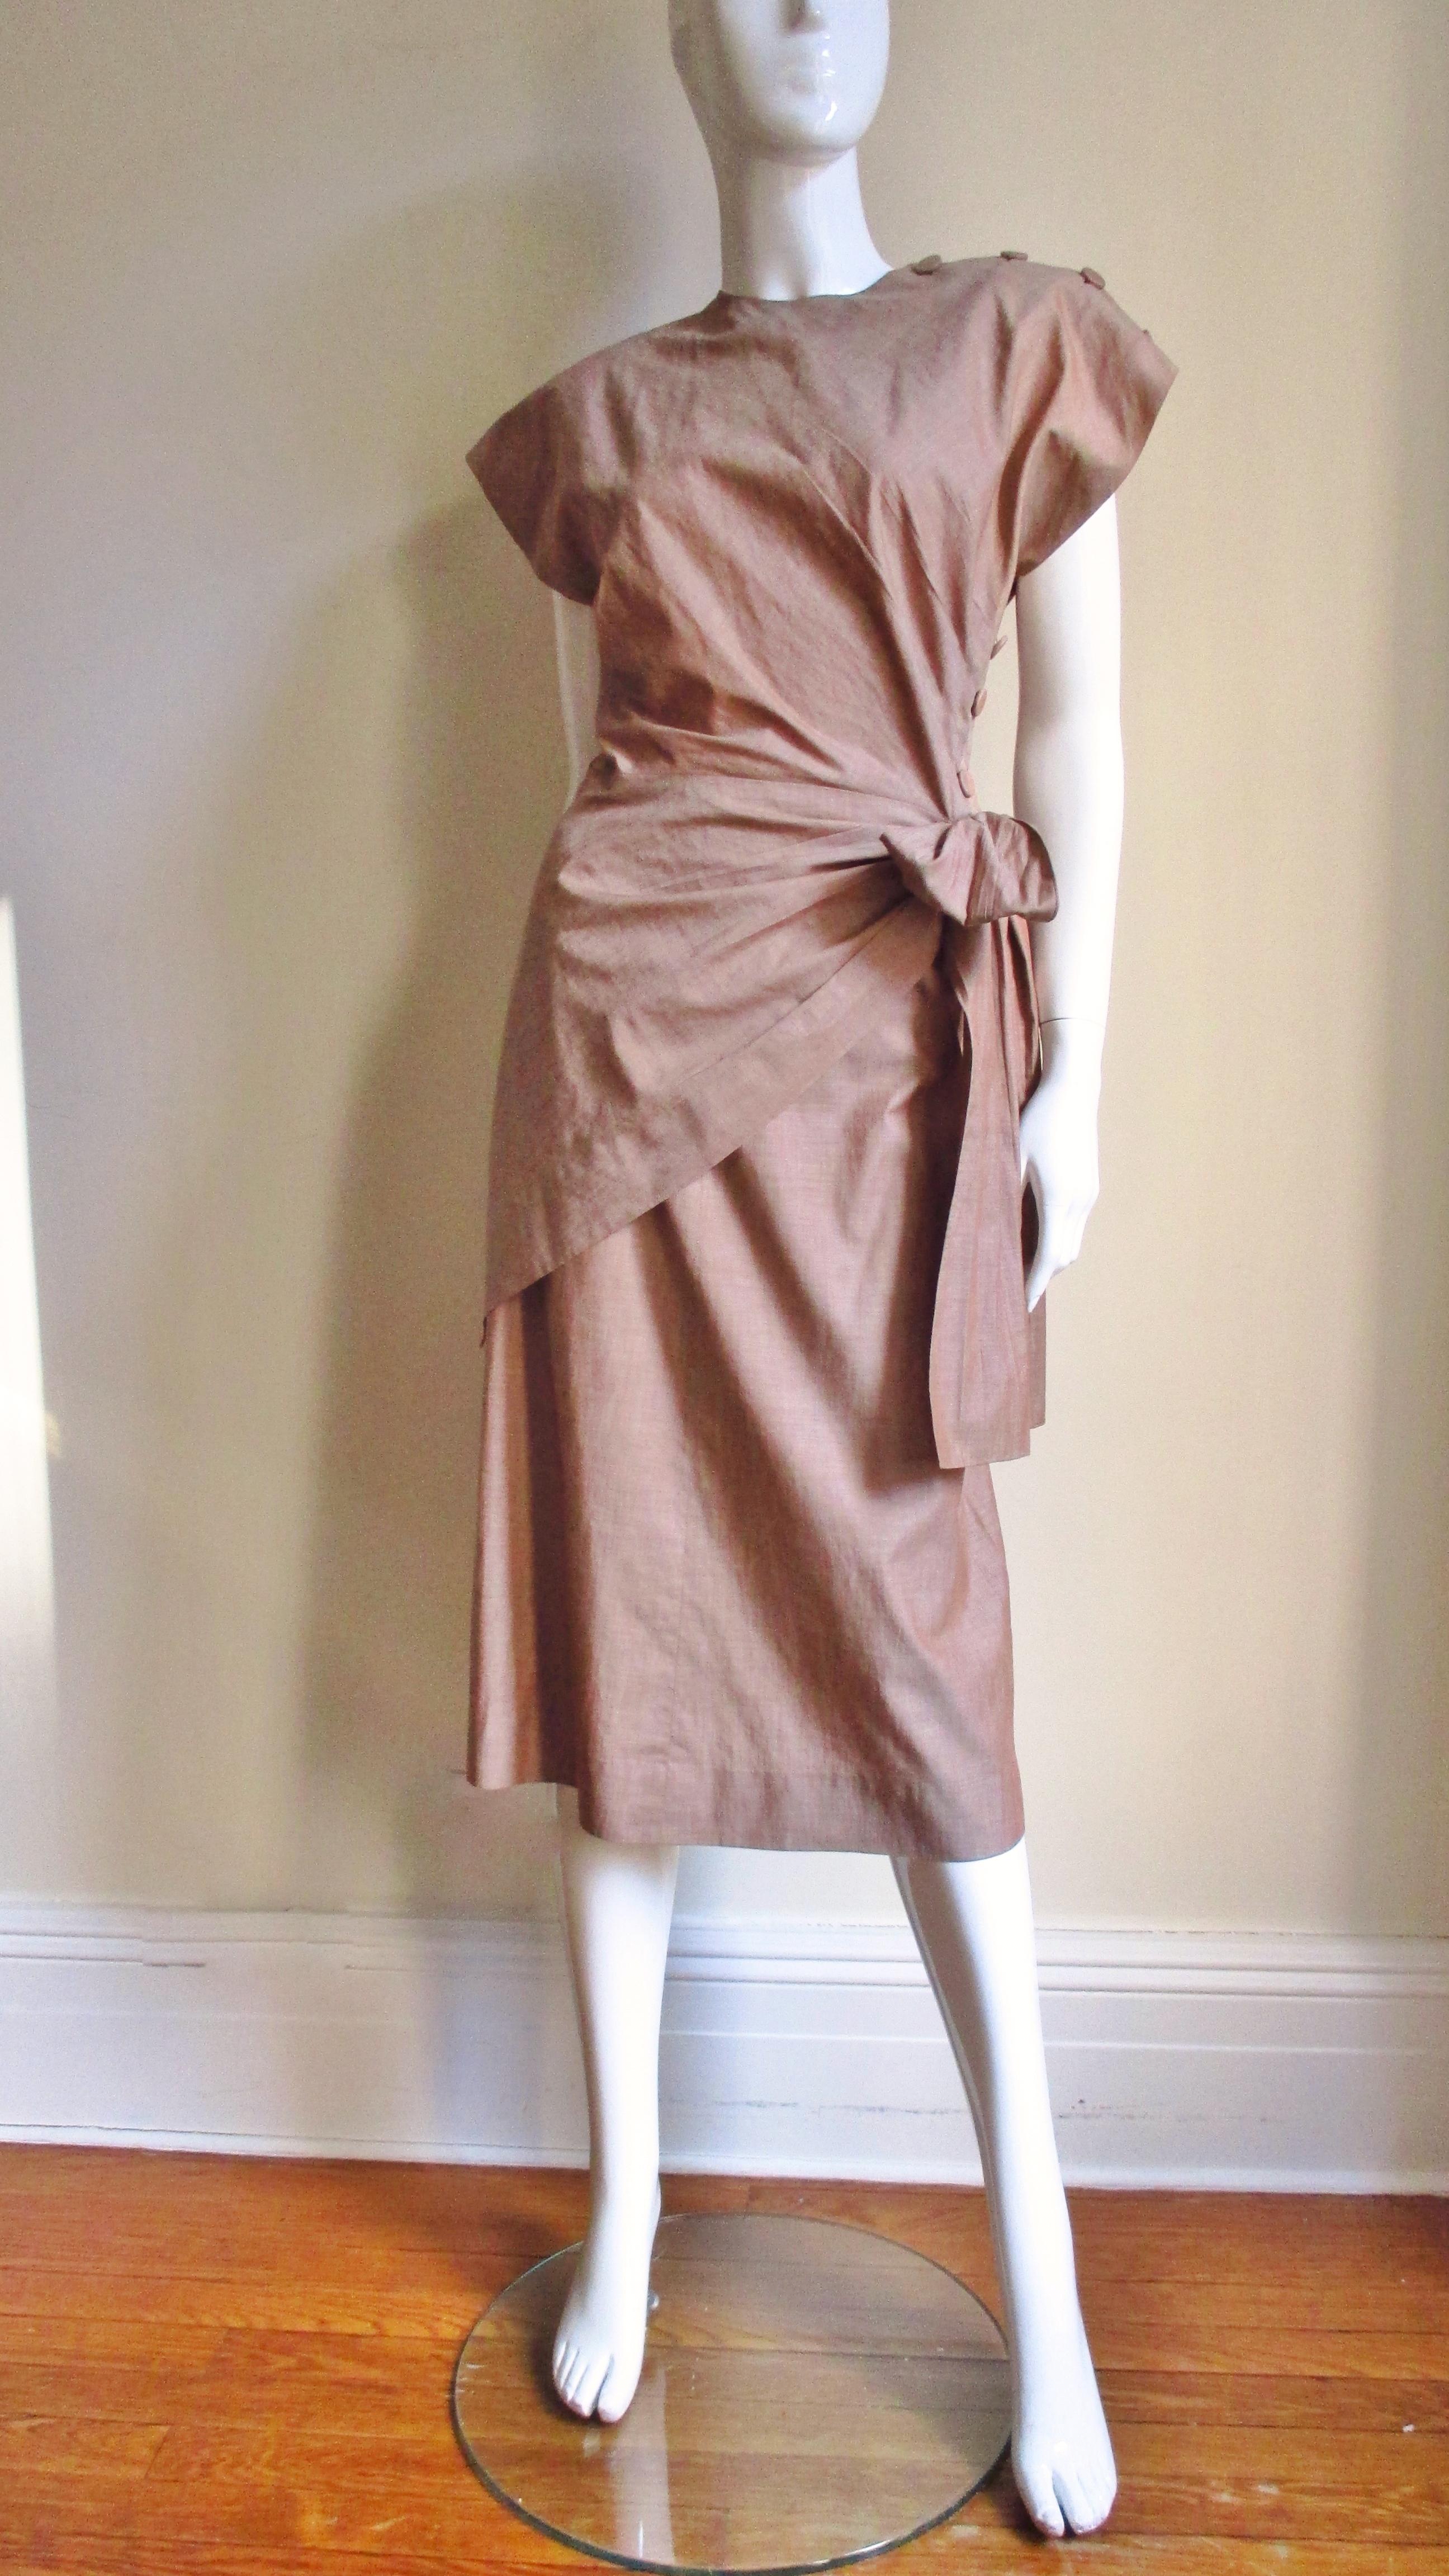  Adele Simpson 1940s Wrap Top and Skirt For Sale 2